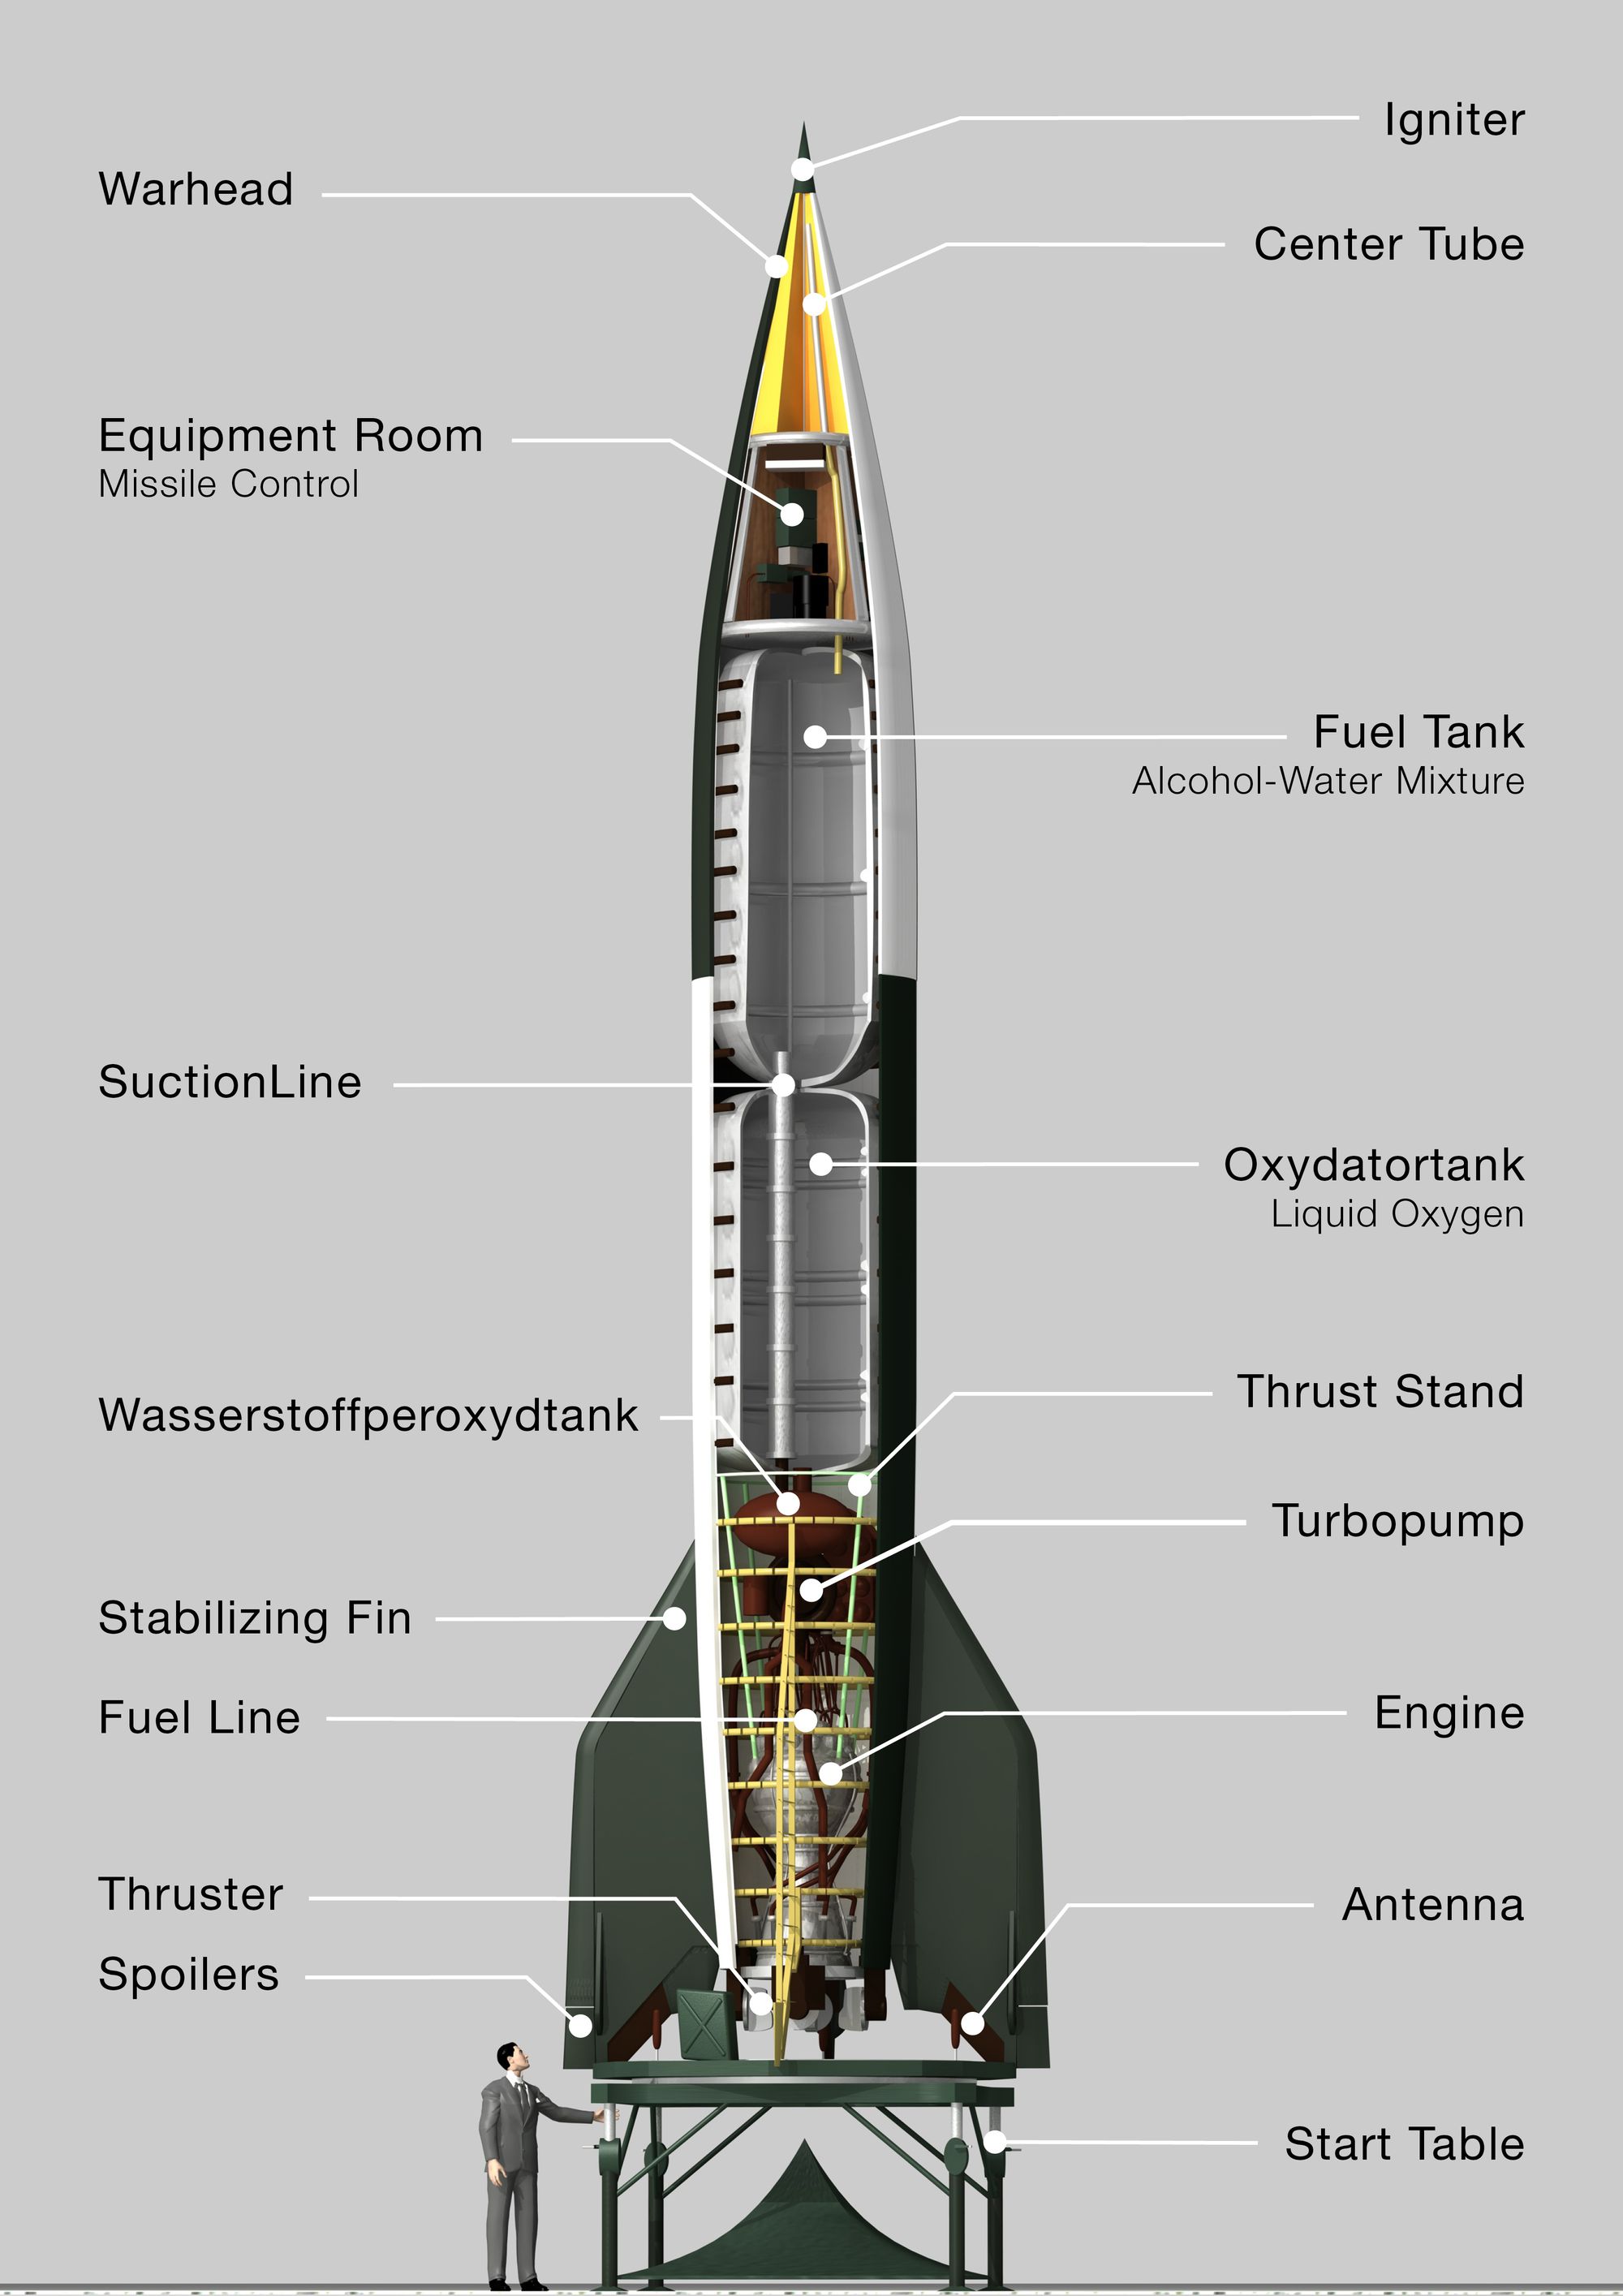 An Over-simplified Tour of Rocketry Beginnings